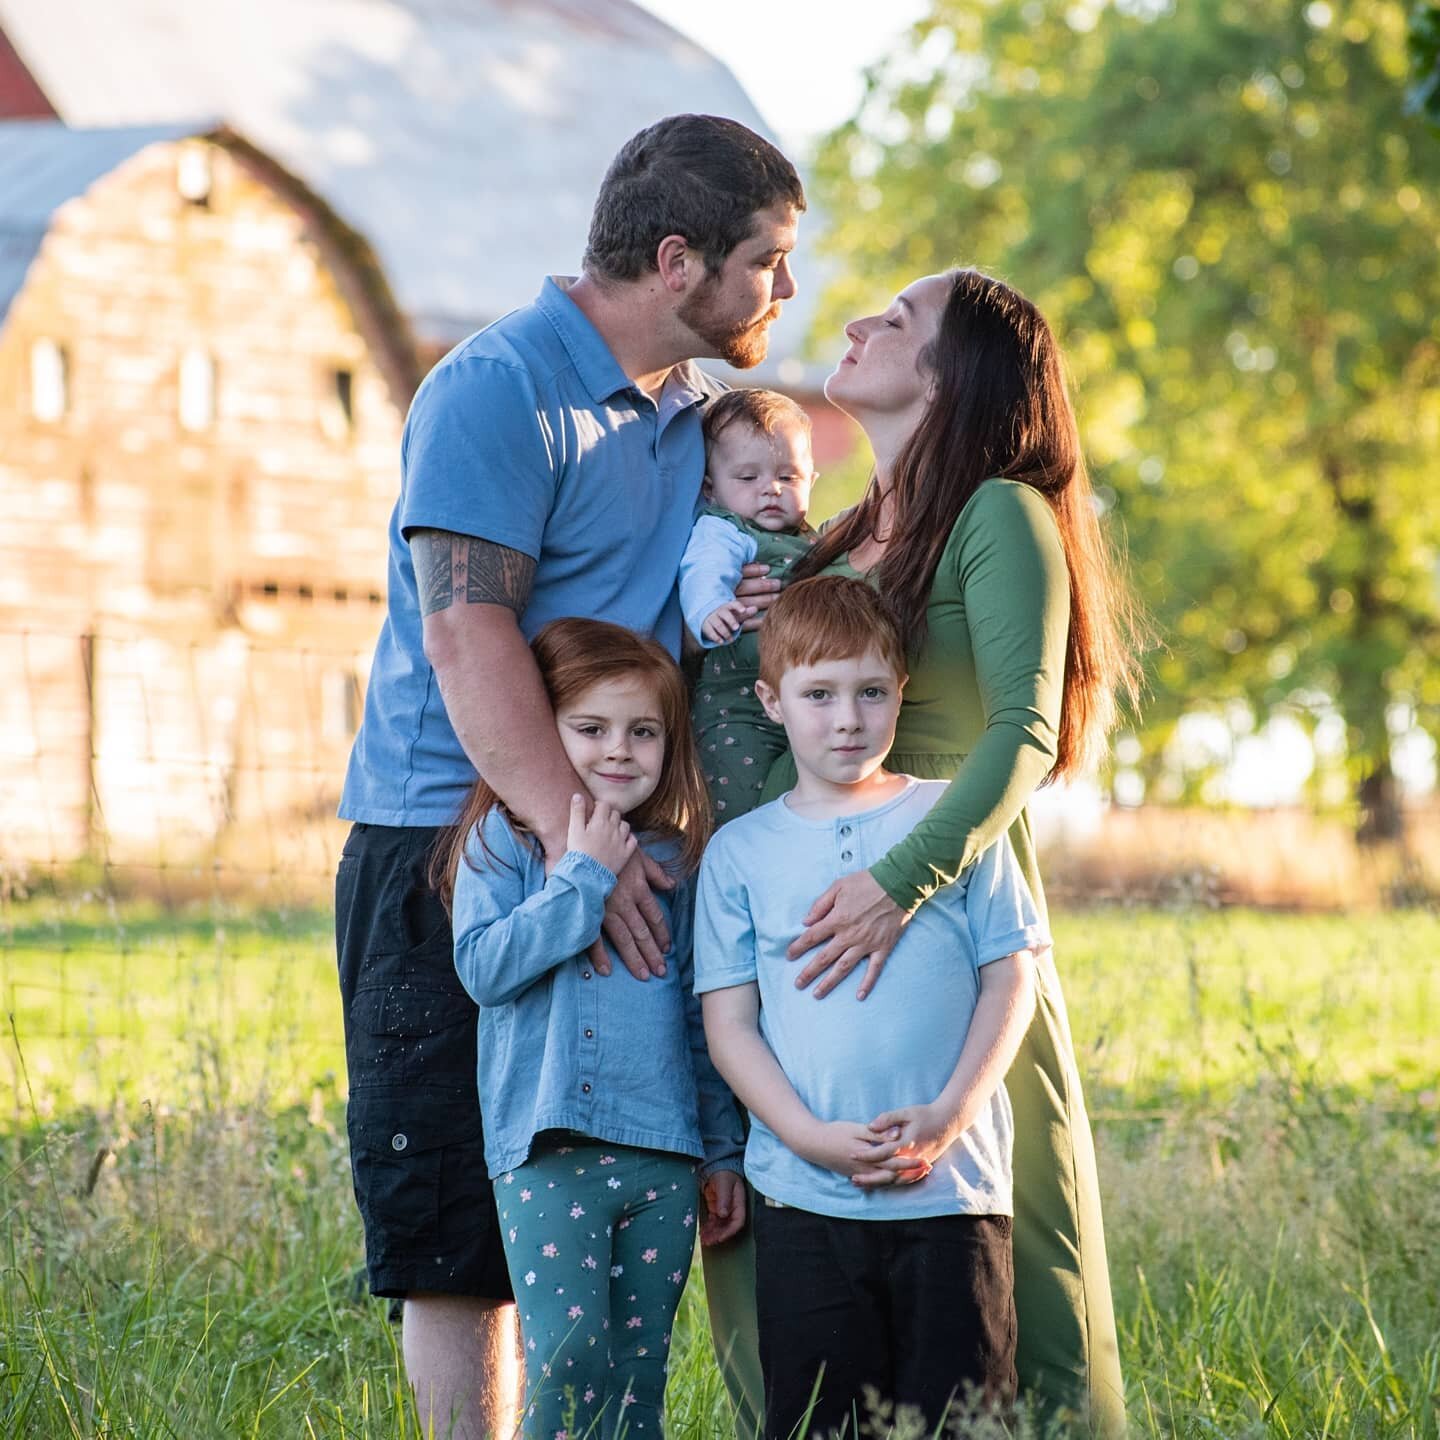 Here's to my longest running photographed family! I love seeing them grow and kids get cuter. 

I havr definitely broadened my skills over the last year with familys, newborns, and maternities. They have been apart of that. And of course photo sessio